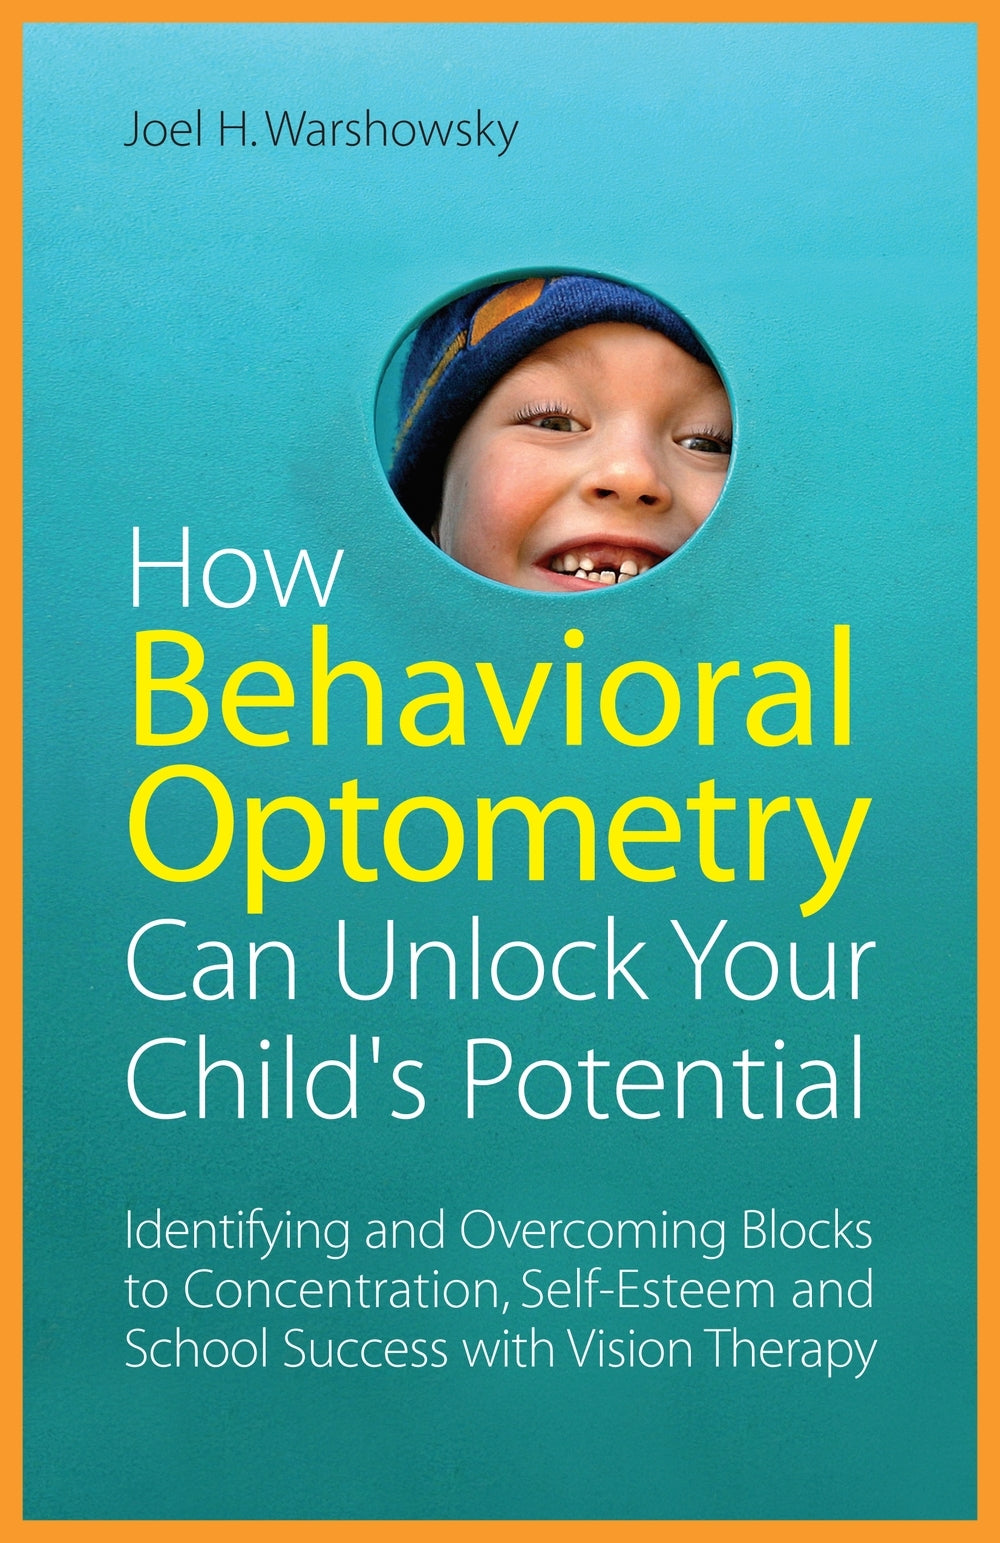 How Behavioral Optometry Can Unlock Your Child's Potential by Joel H. Warshowsky